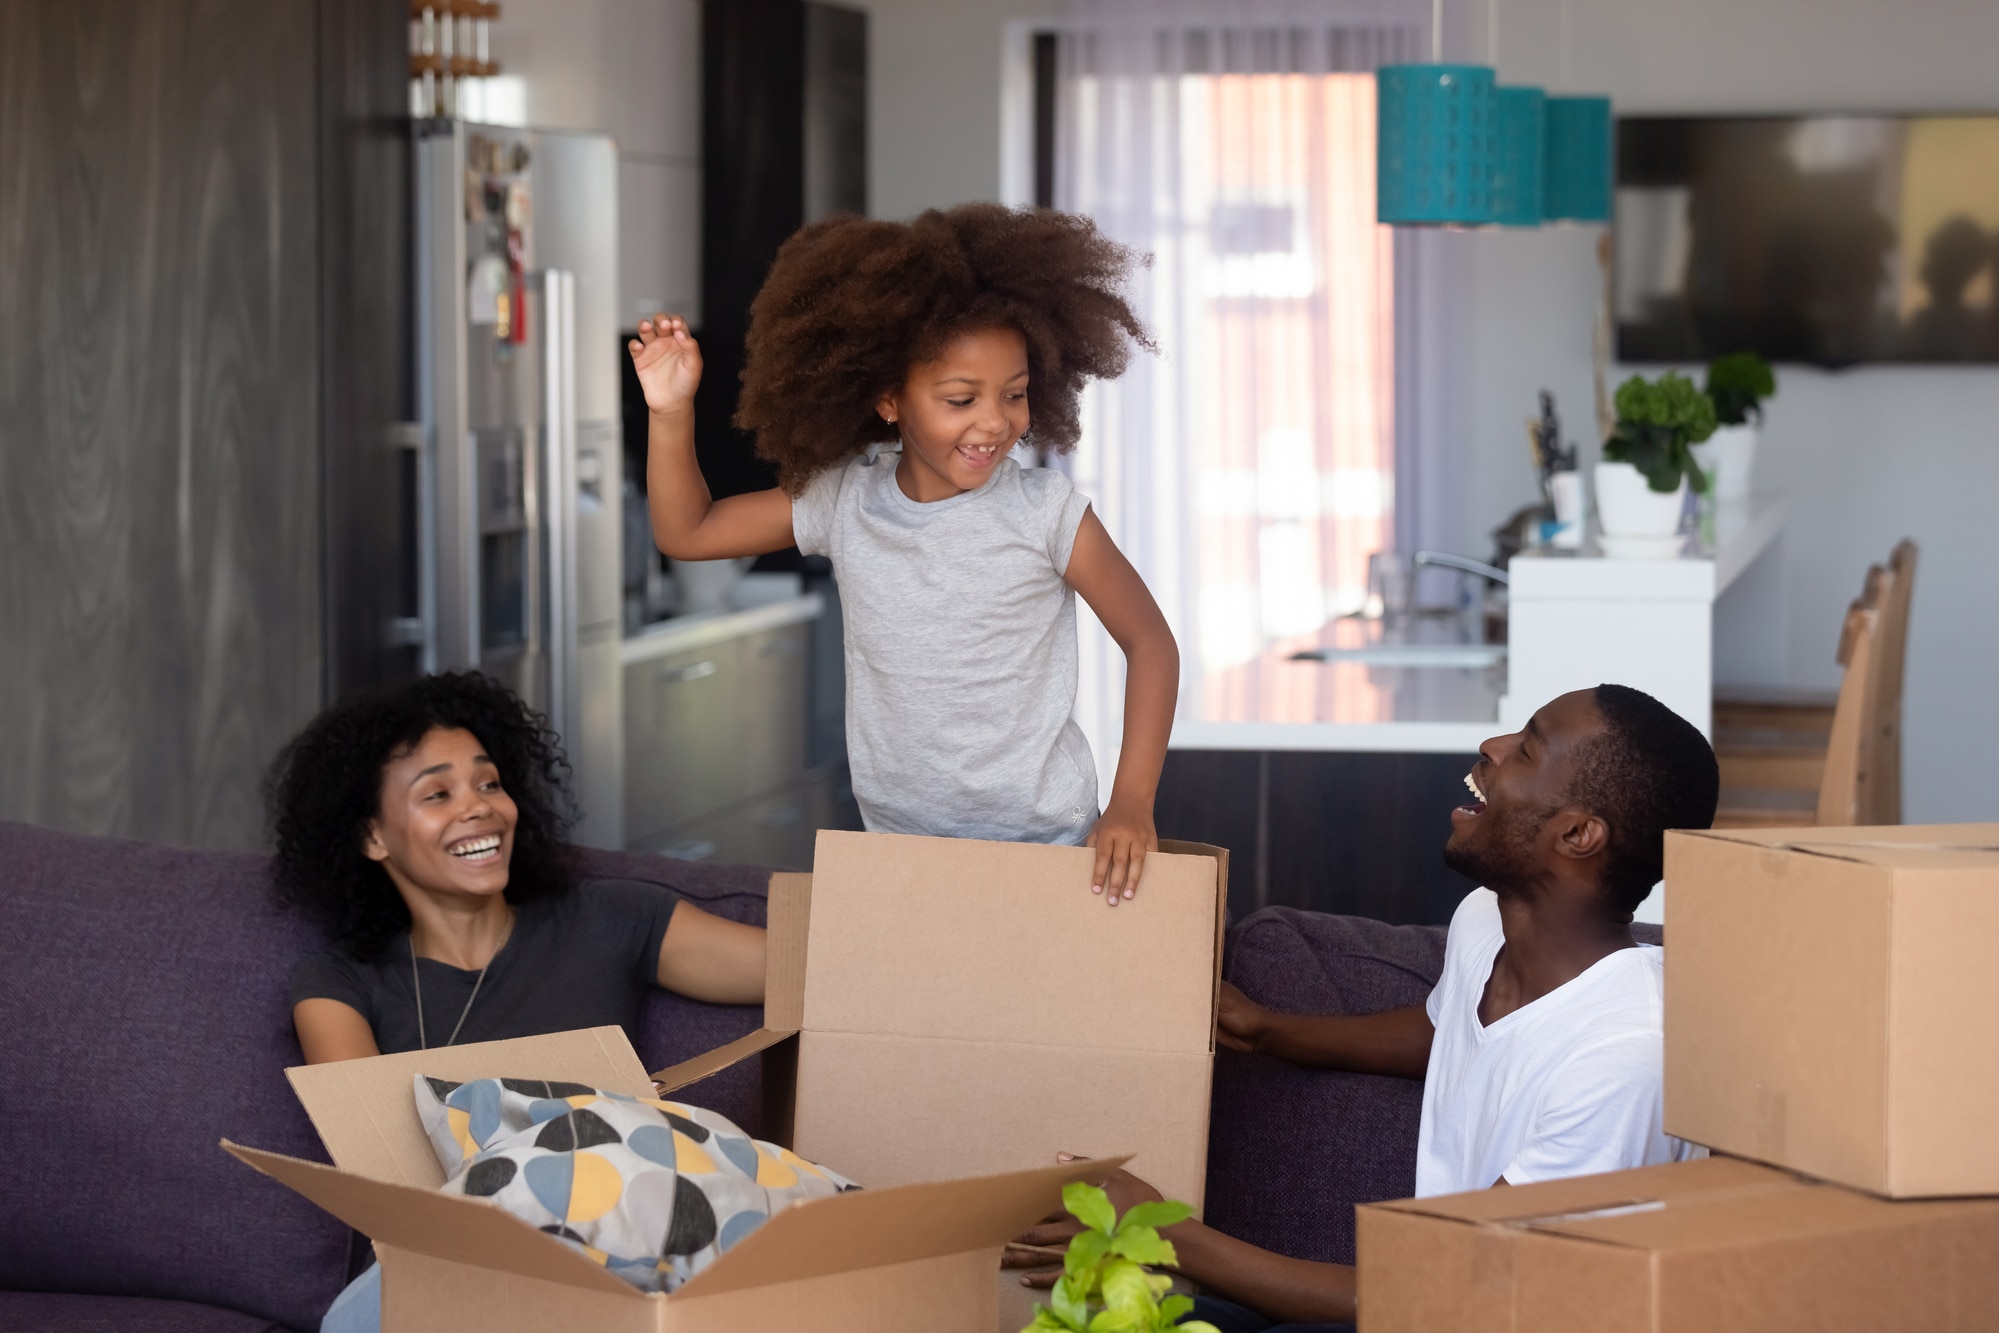 Family packing boxes. A little girl is standing in a box and her parents are smiling